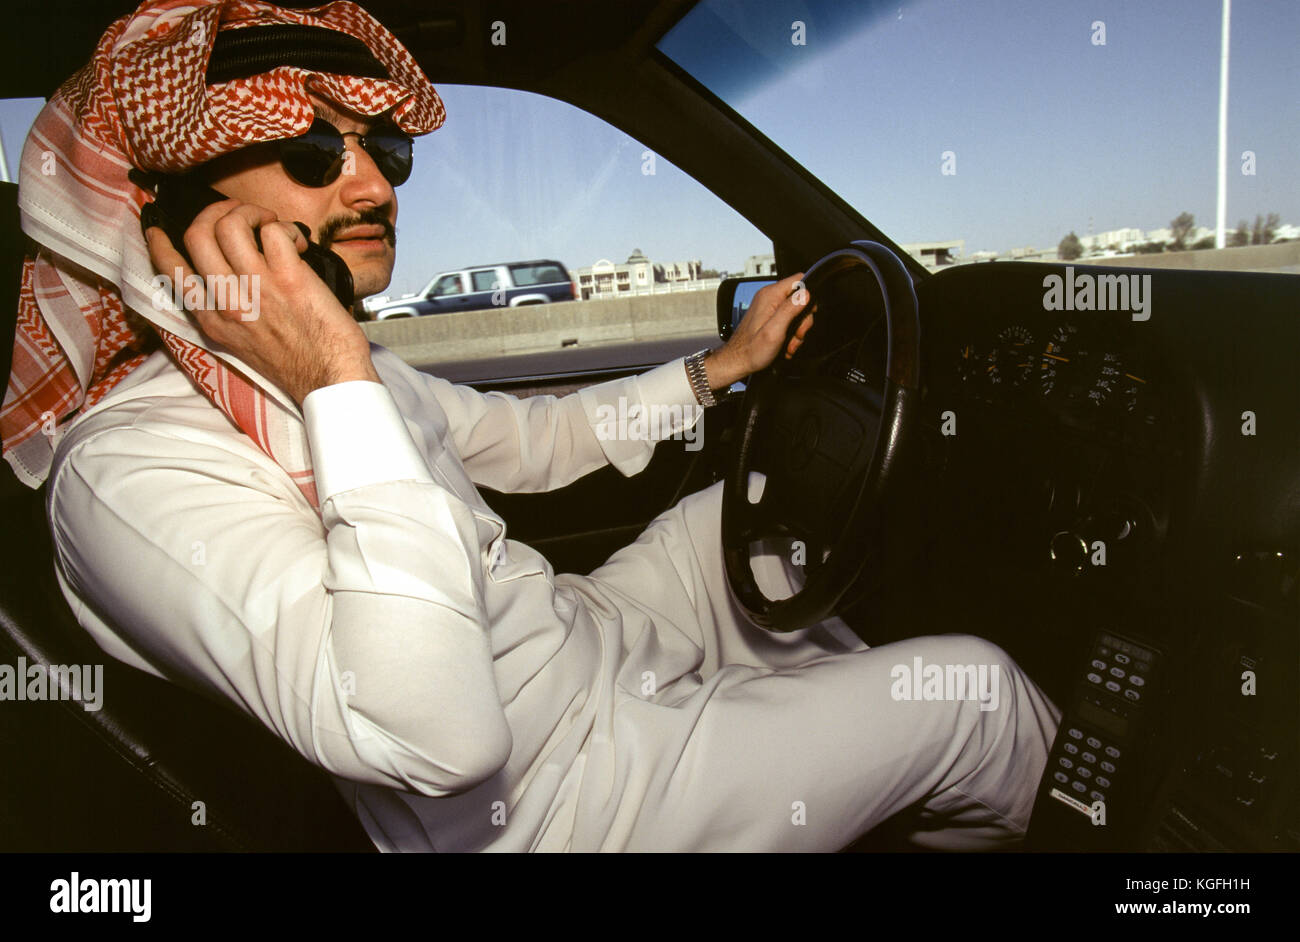 Saudi prince Al-Waleed Bin Talal bin Abdulaziz al Saud, businessman, investor and philanthropist, and member of the Saudi royal family, driving to his palace in Riyadh in 1997.   Al-Waleed was detained November 4th, 2017 in an anti-corruption drive that included at least 10 other princes, four ministers and tens of former ministers, that sent shock waves through the kingdom and the world's major financial centers. Stock Photo